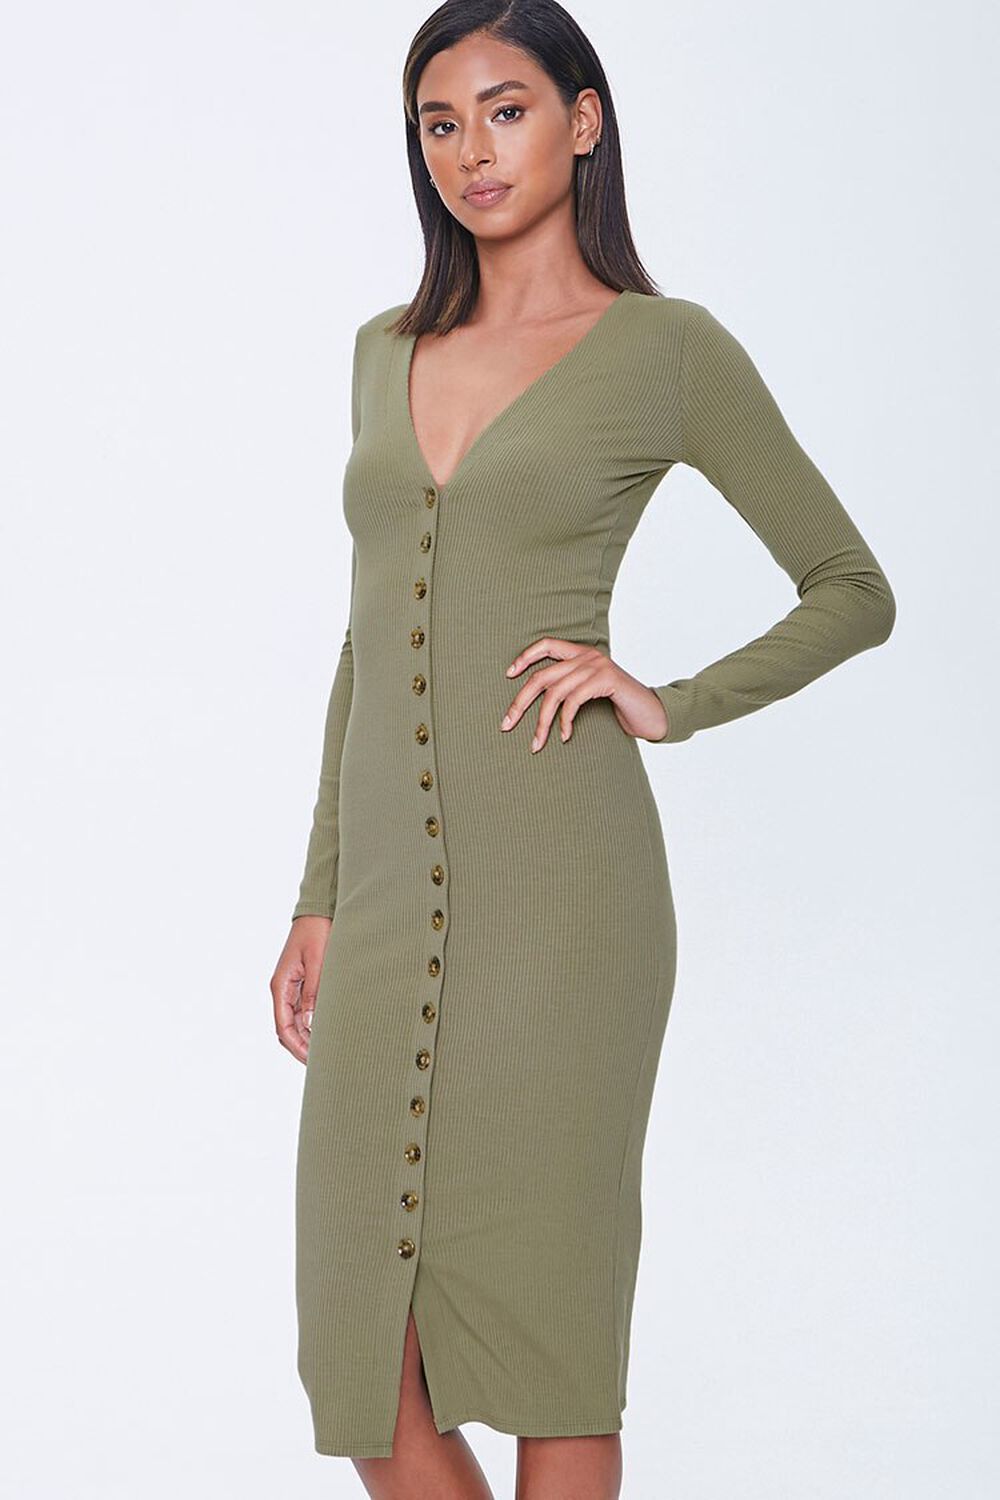 OLIVE Button-Front Midi Dress, image 1